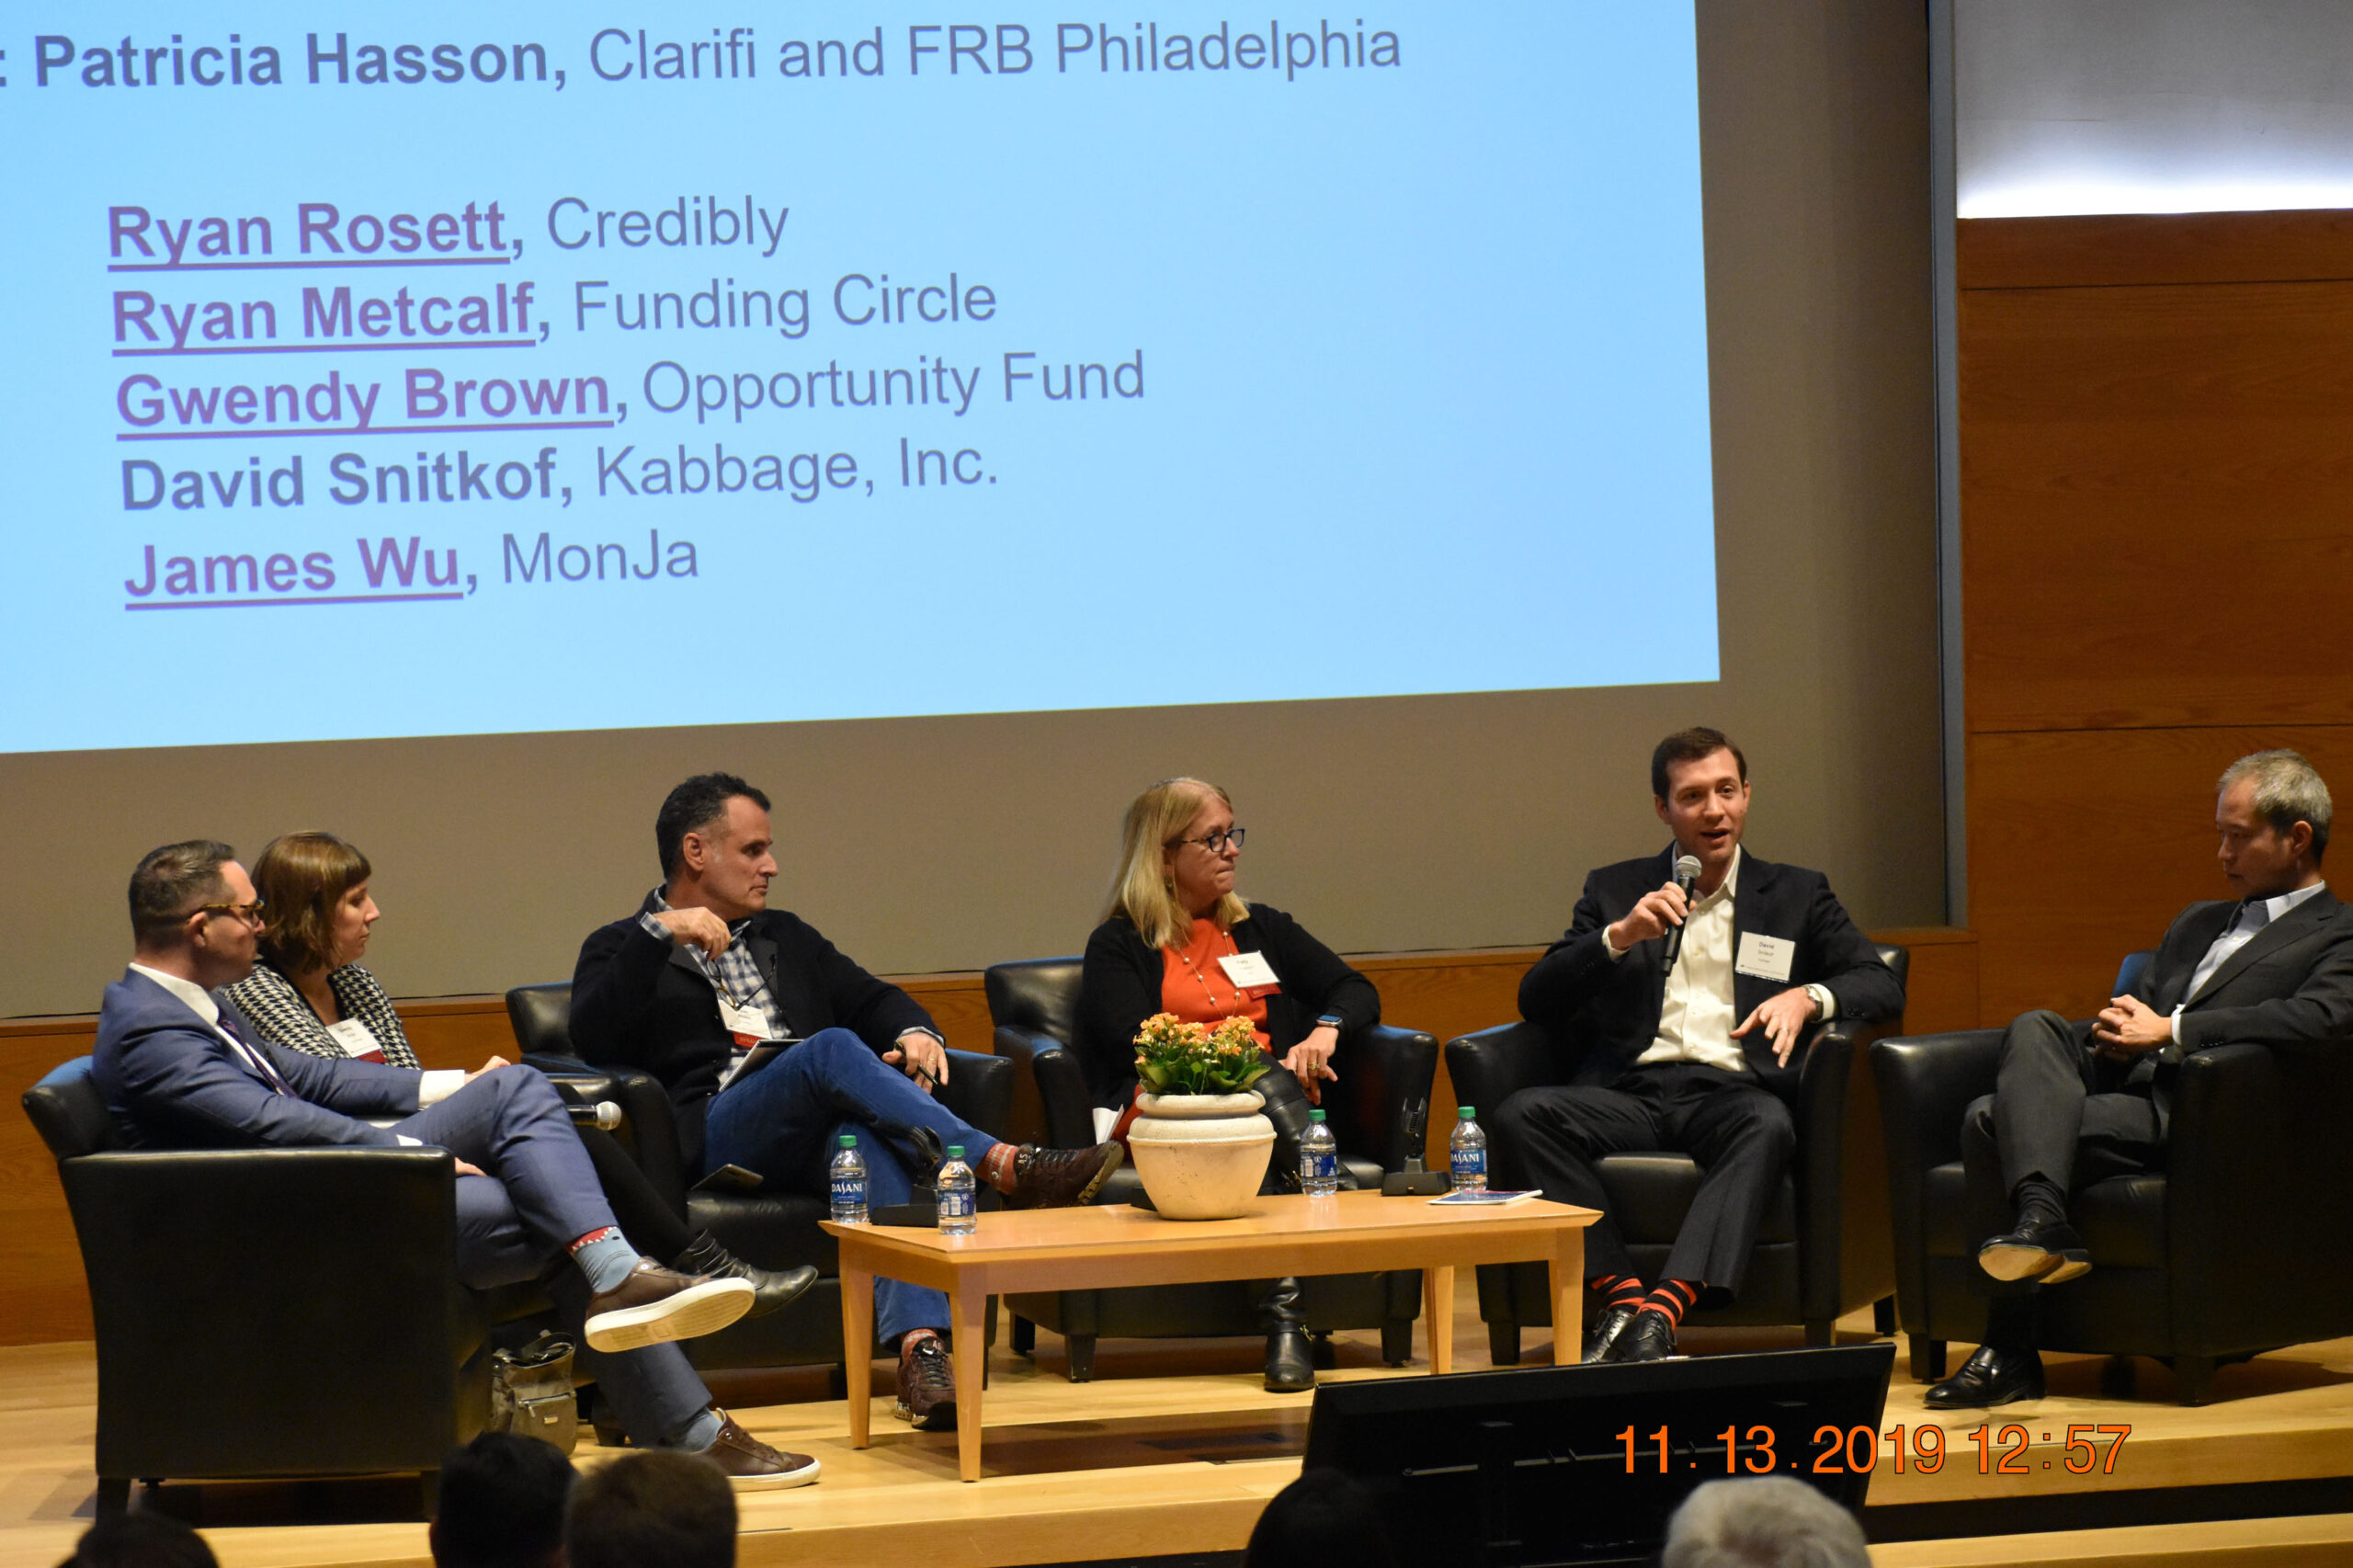 Panel with James Wu, MonJa, at The Federal Reserve Bank of Philadelphia: Third Annual Fintech Conference